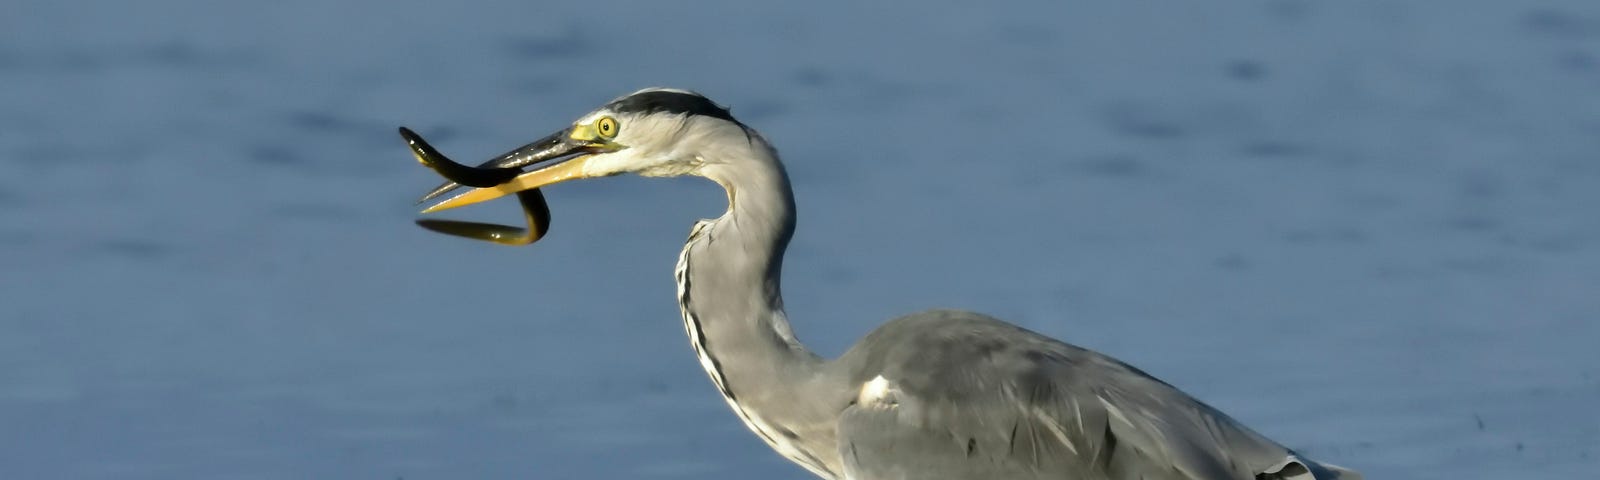 A heron stands in a lake, holding an eel in its beak